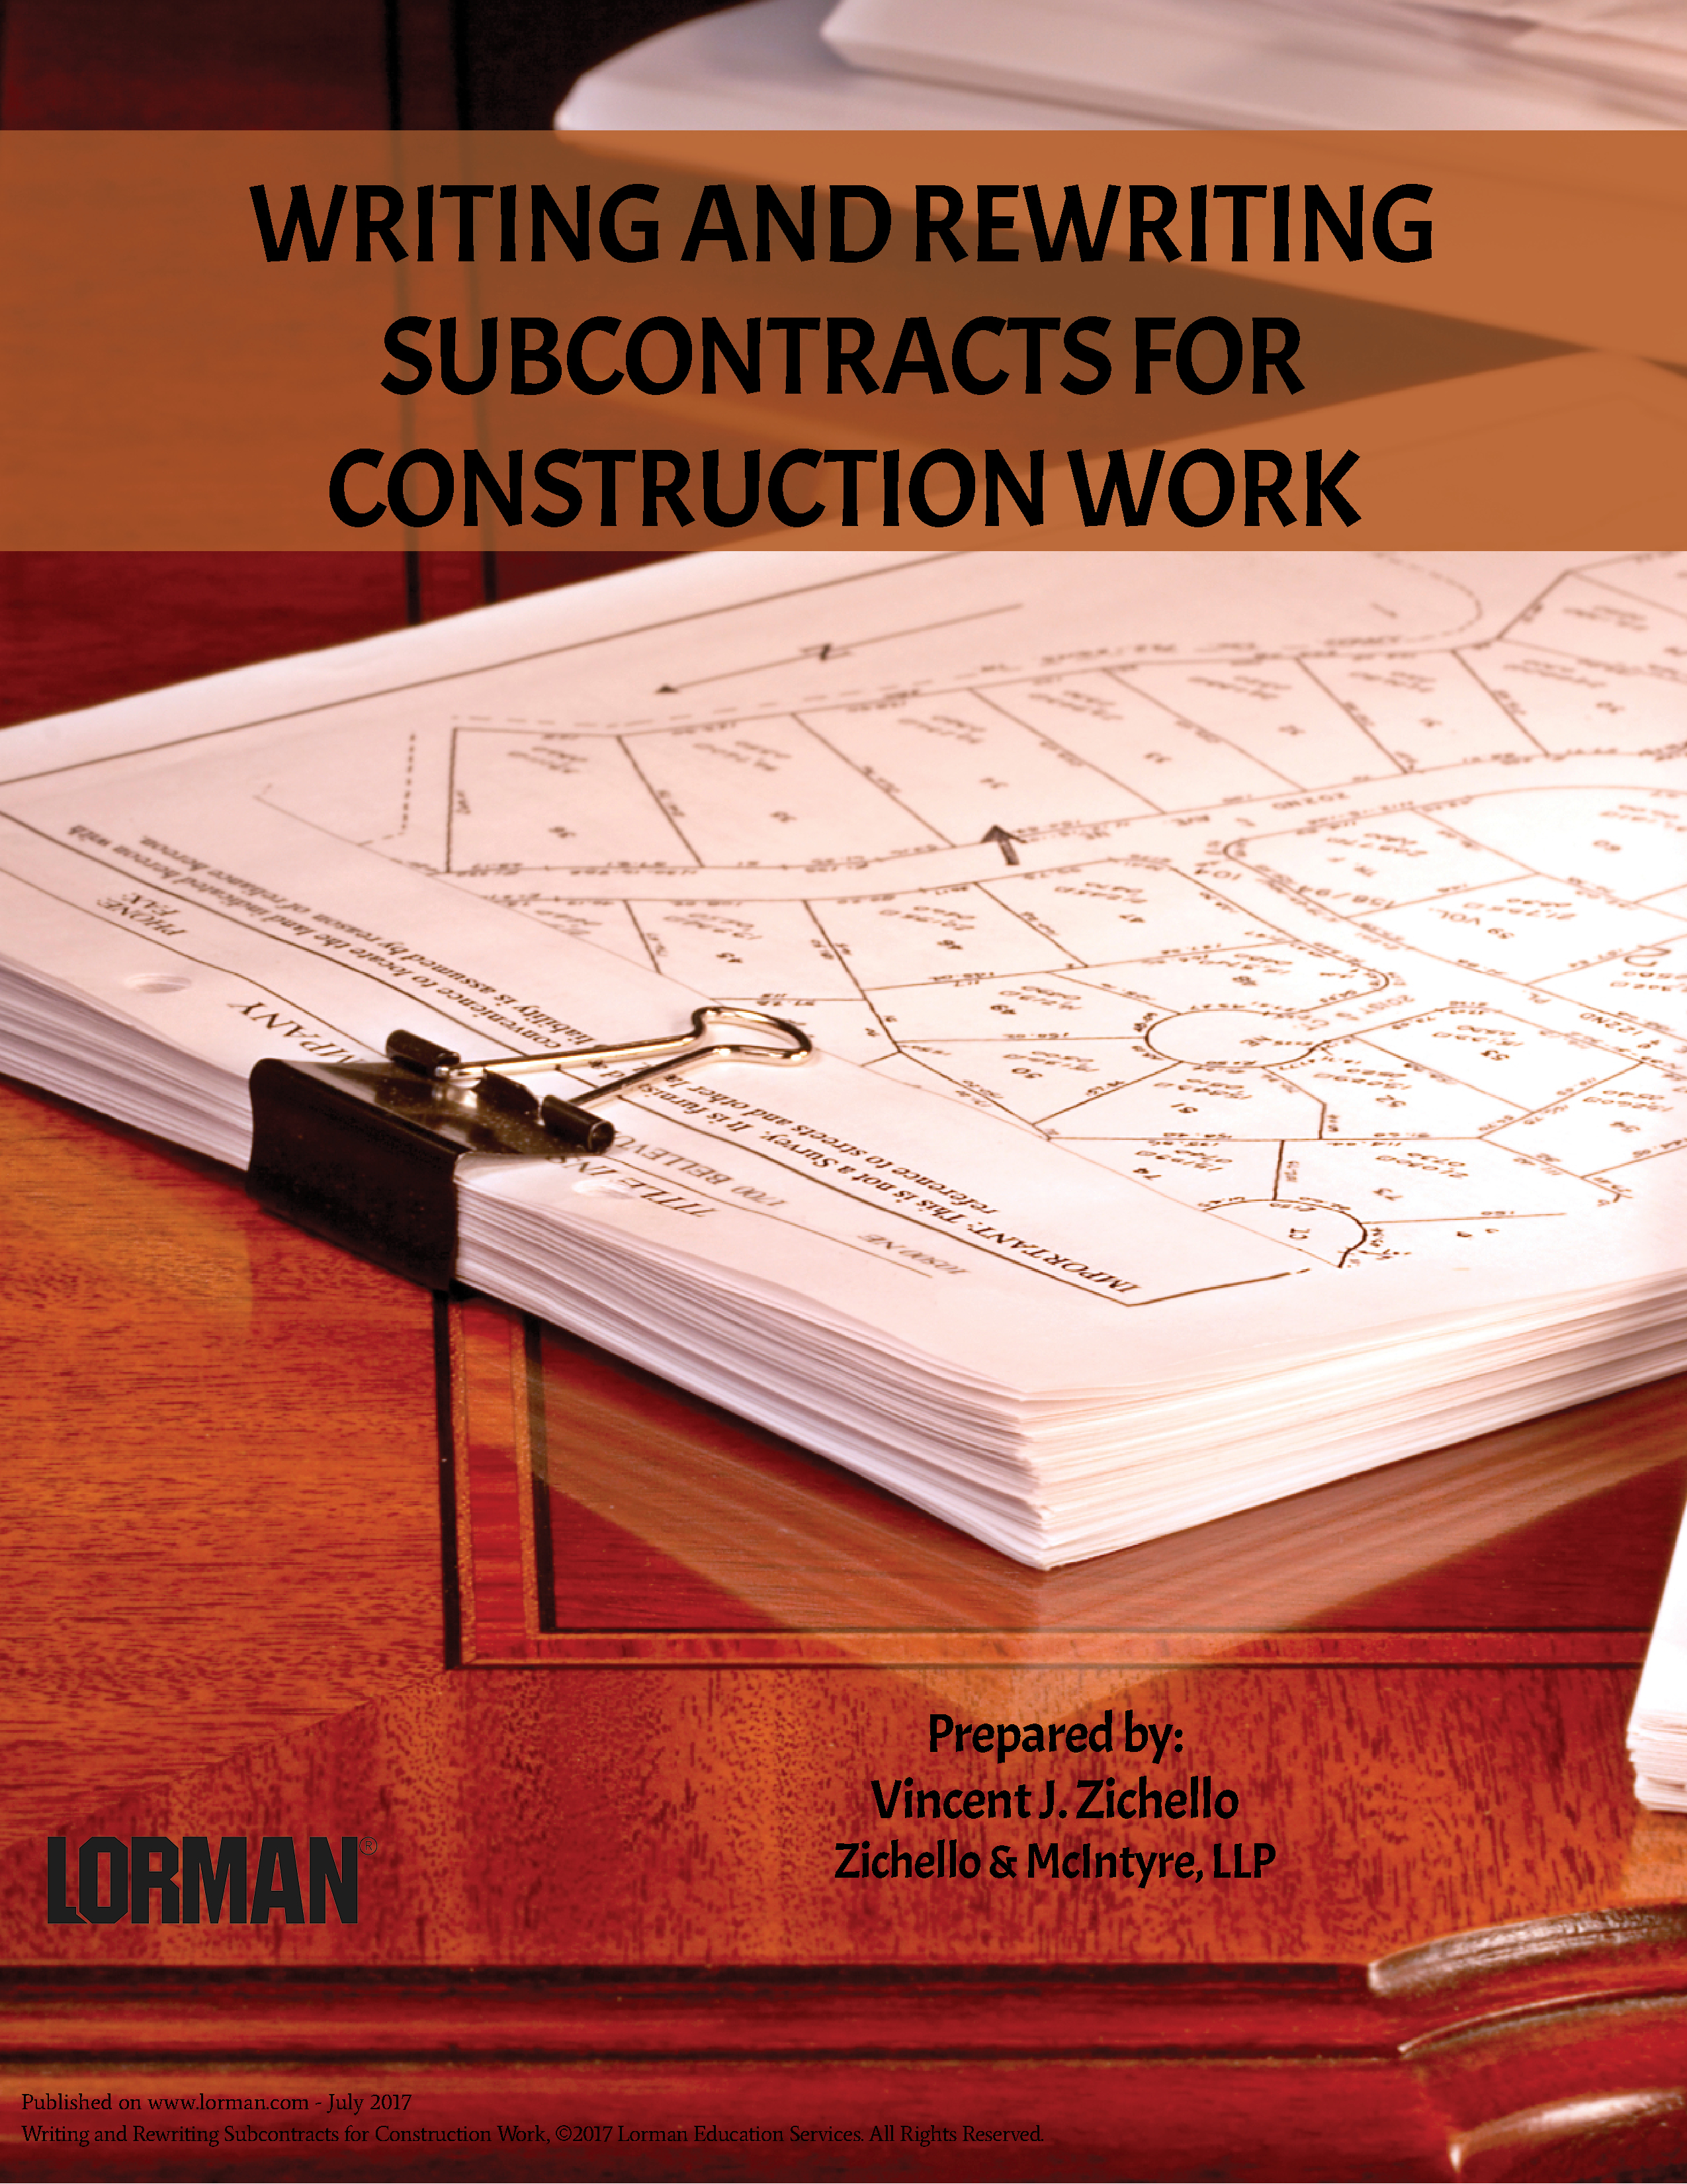 Writing and Rewriting Subcontracts for Construction Work